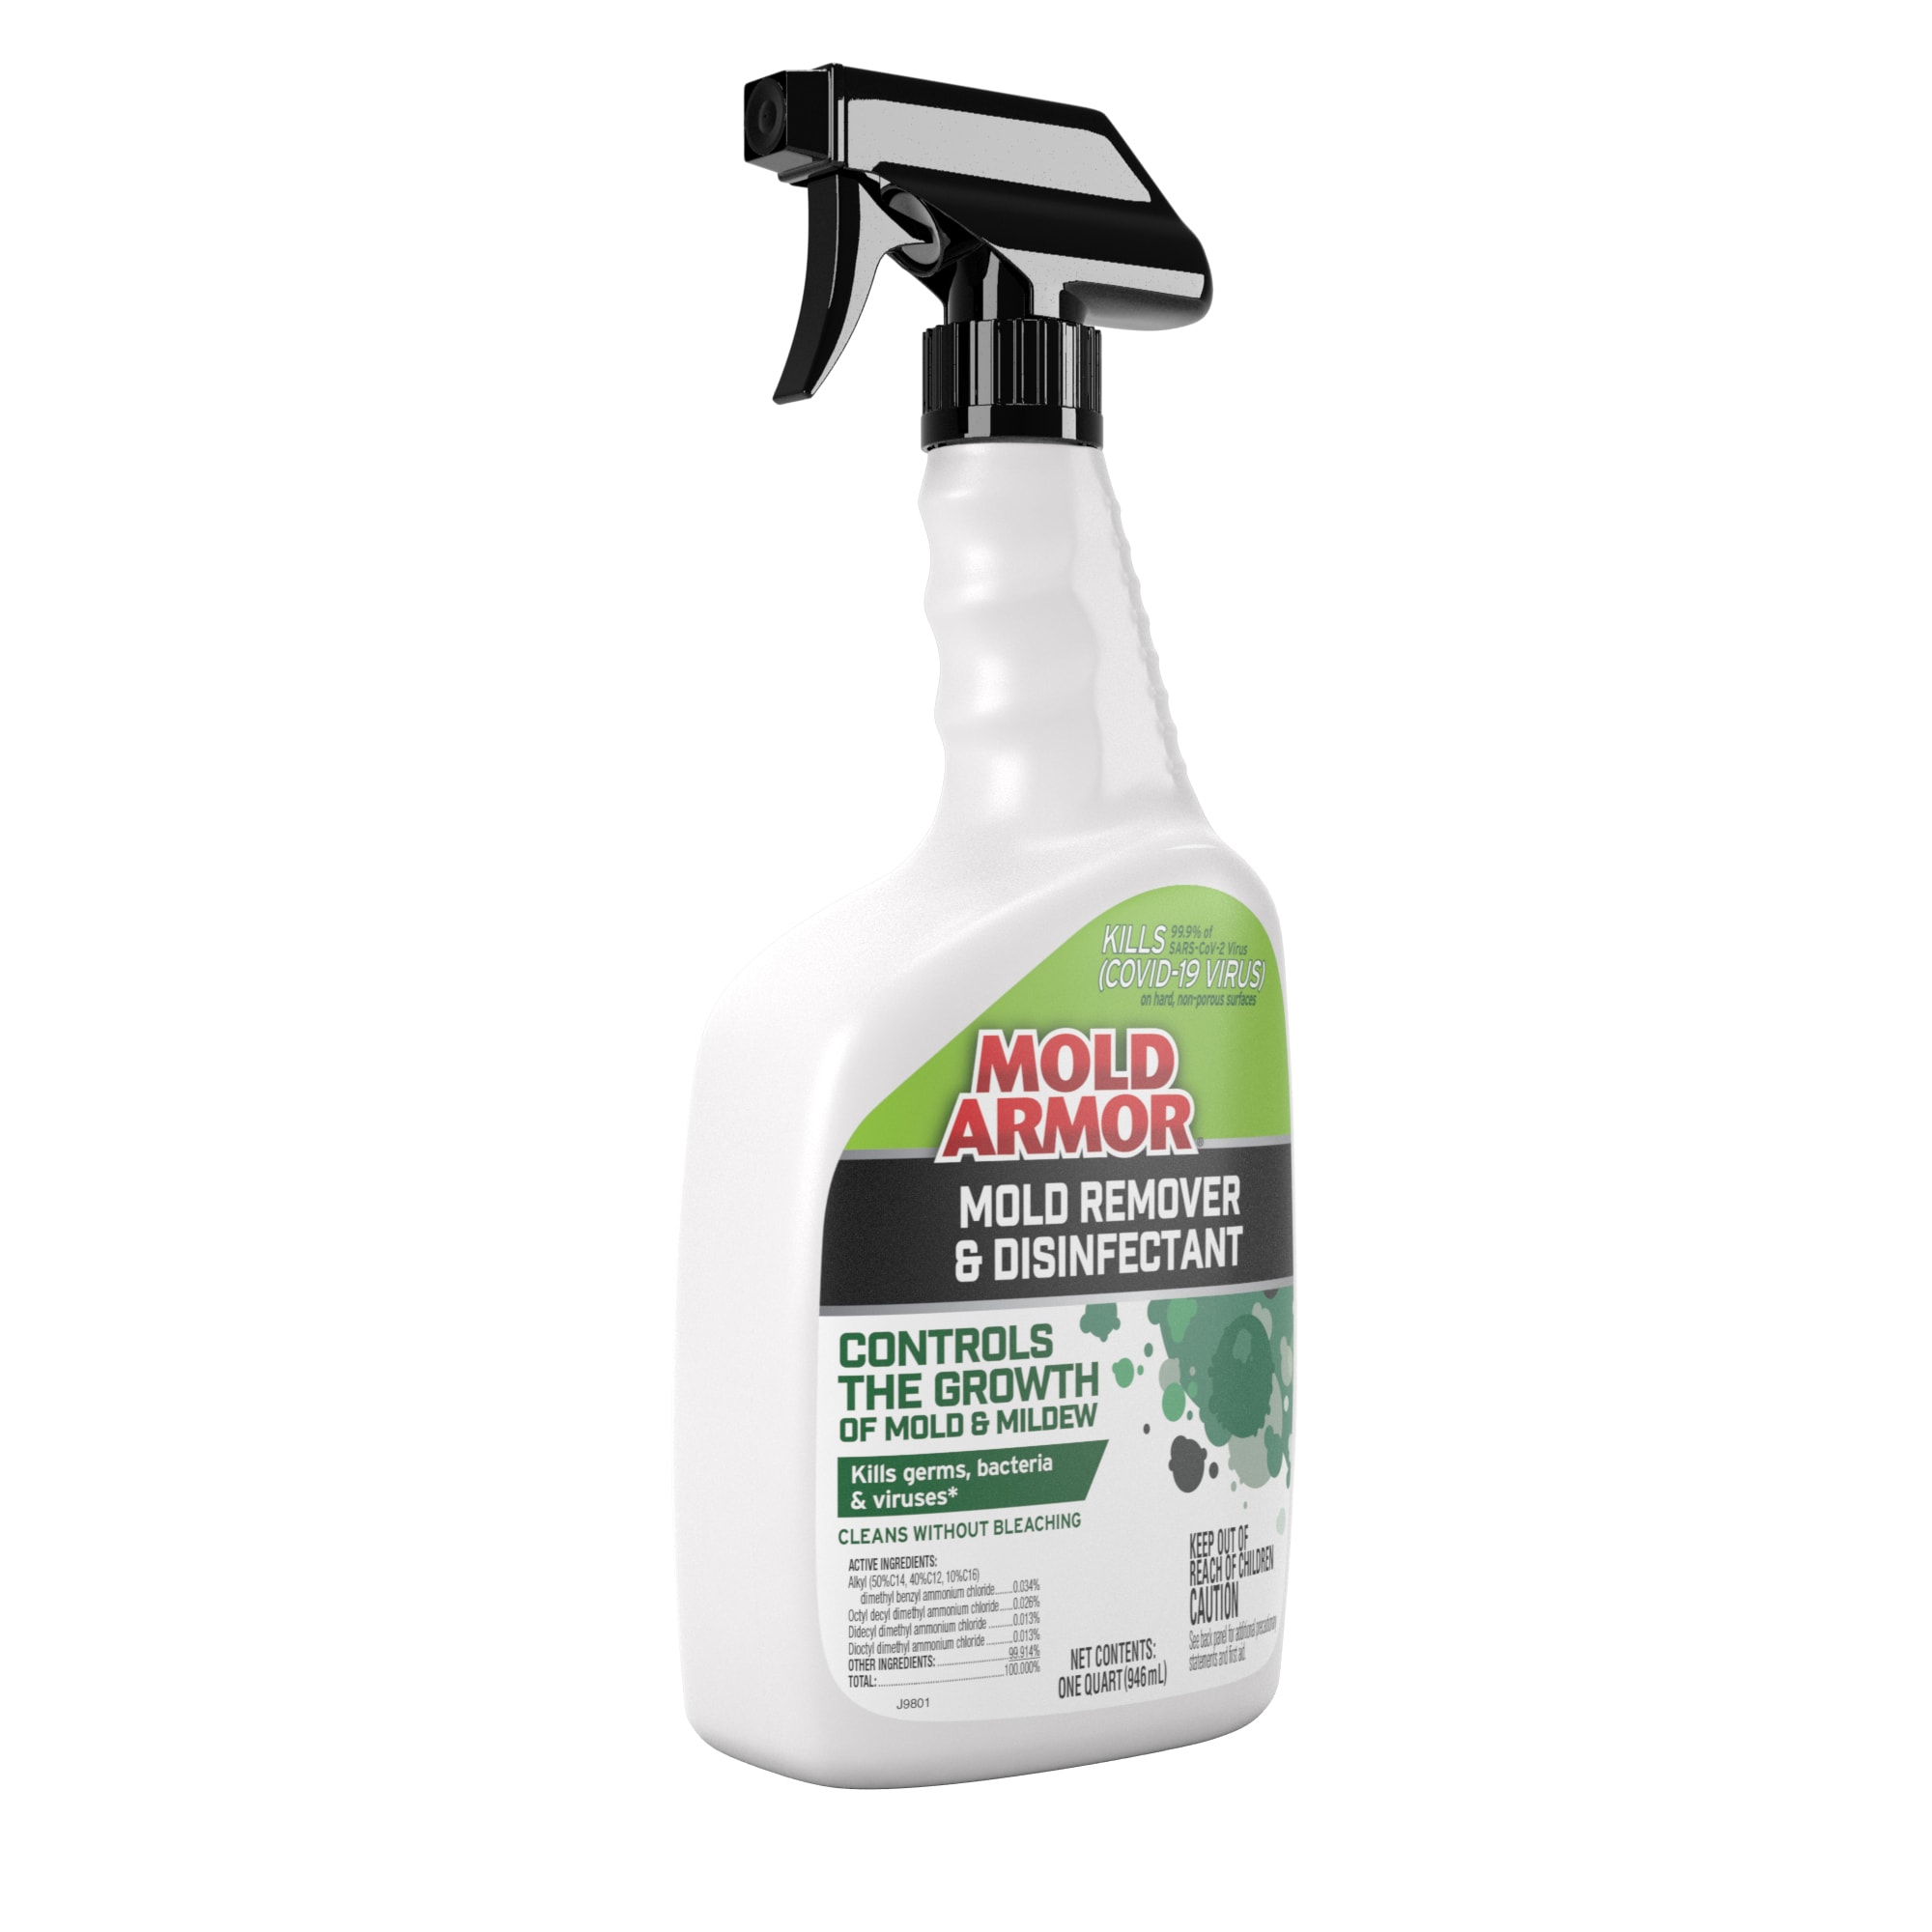 SoSafe Spray Away General Purpose Cleaner and Mold Remover